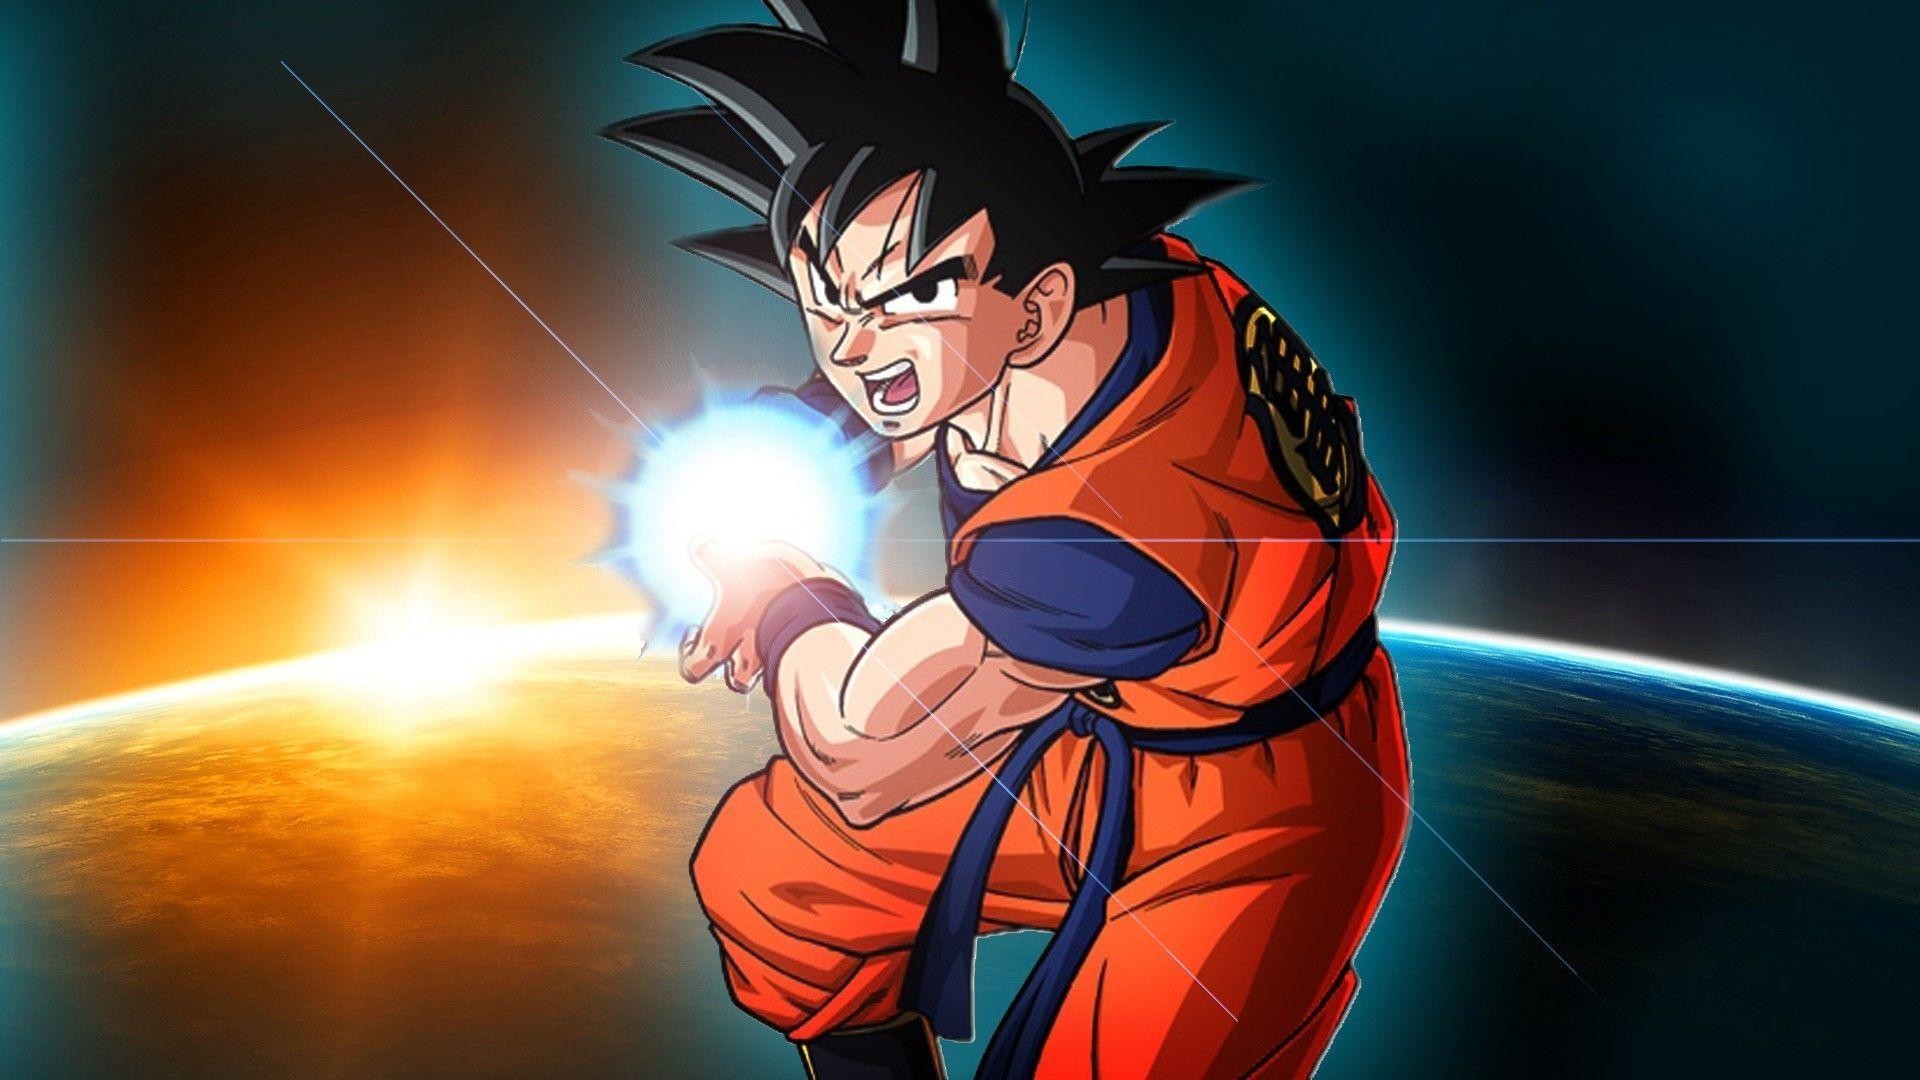 Goku Images HD Backgrounds With Resolution 1920X1080 pixel. You can make this wallpaper for your Desktop Computer Backgrounds, Mac Wallpapers, Android Lock screen or iPhone Screensavers